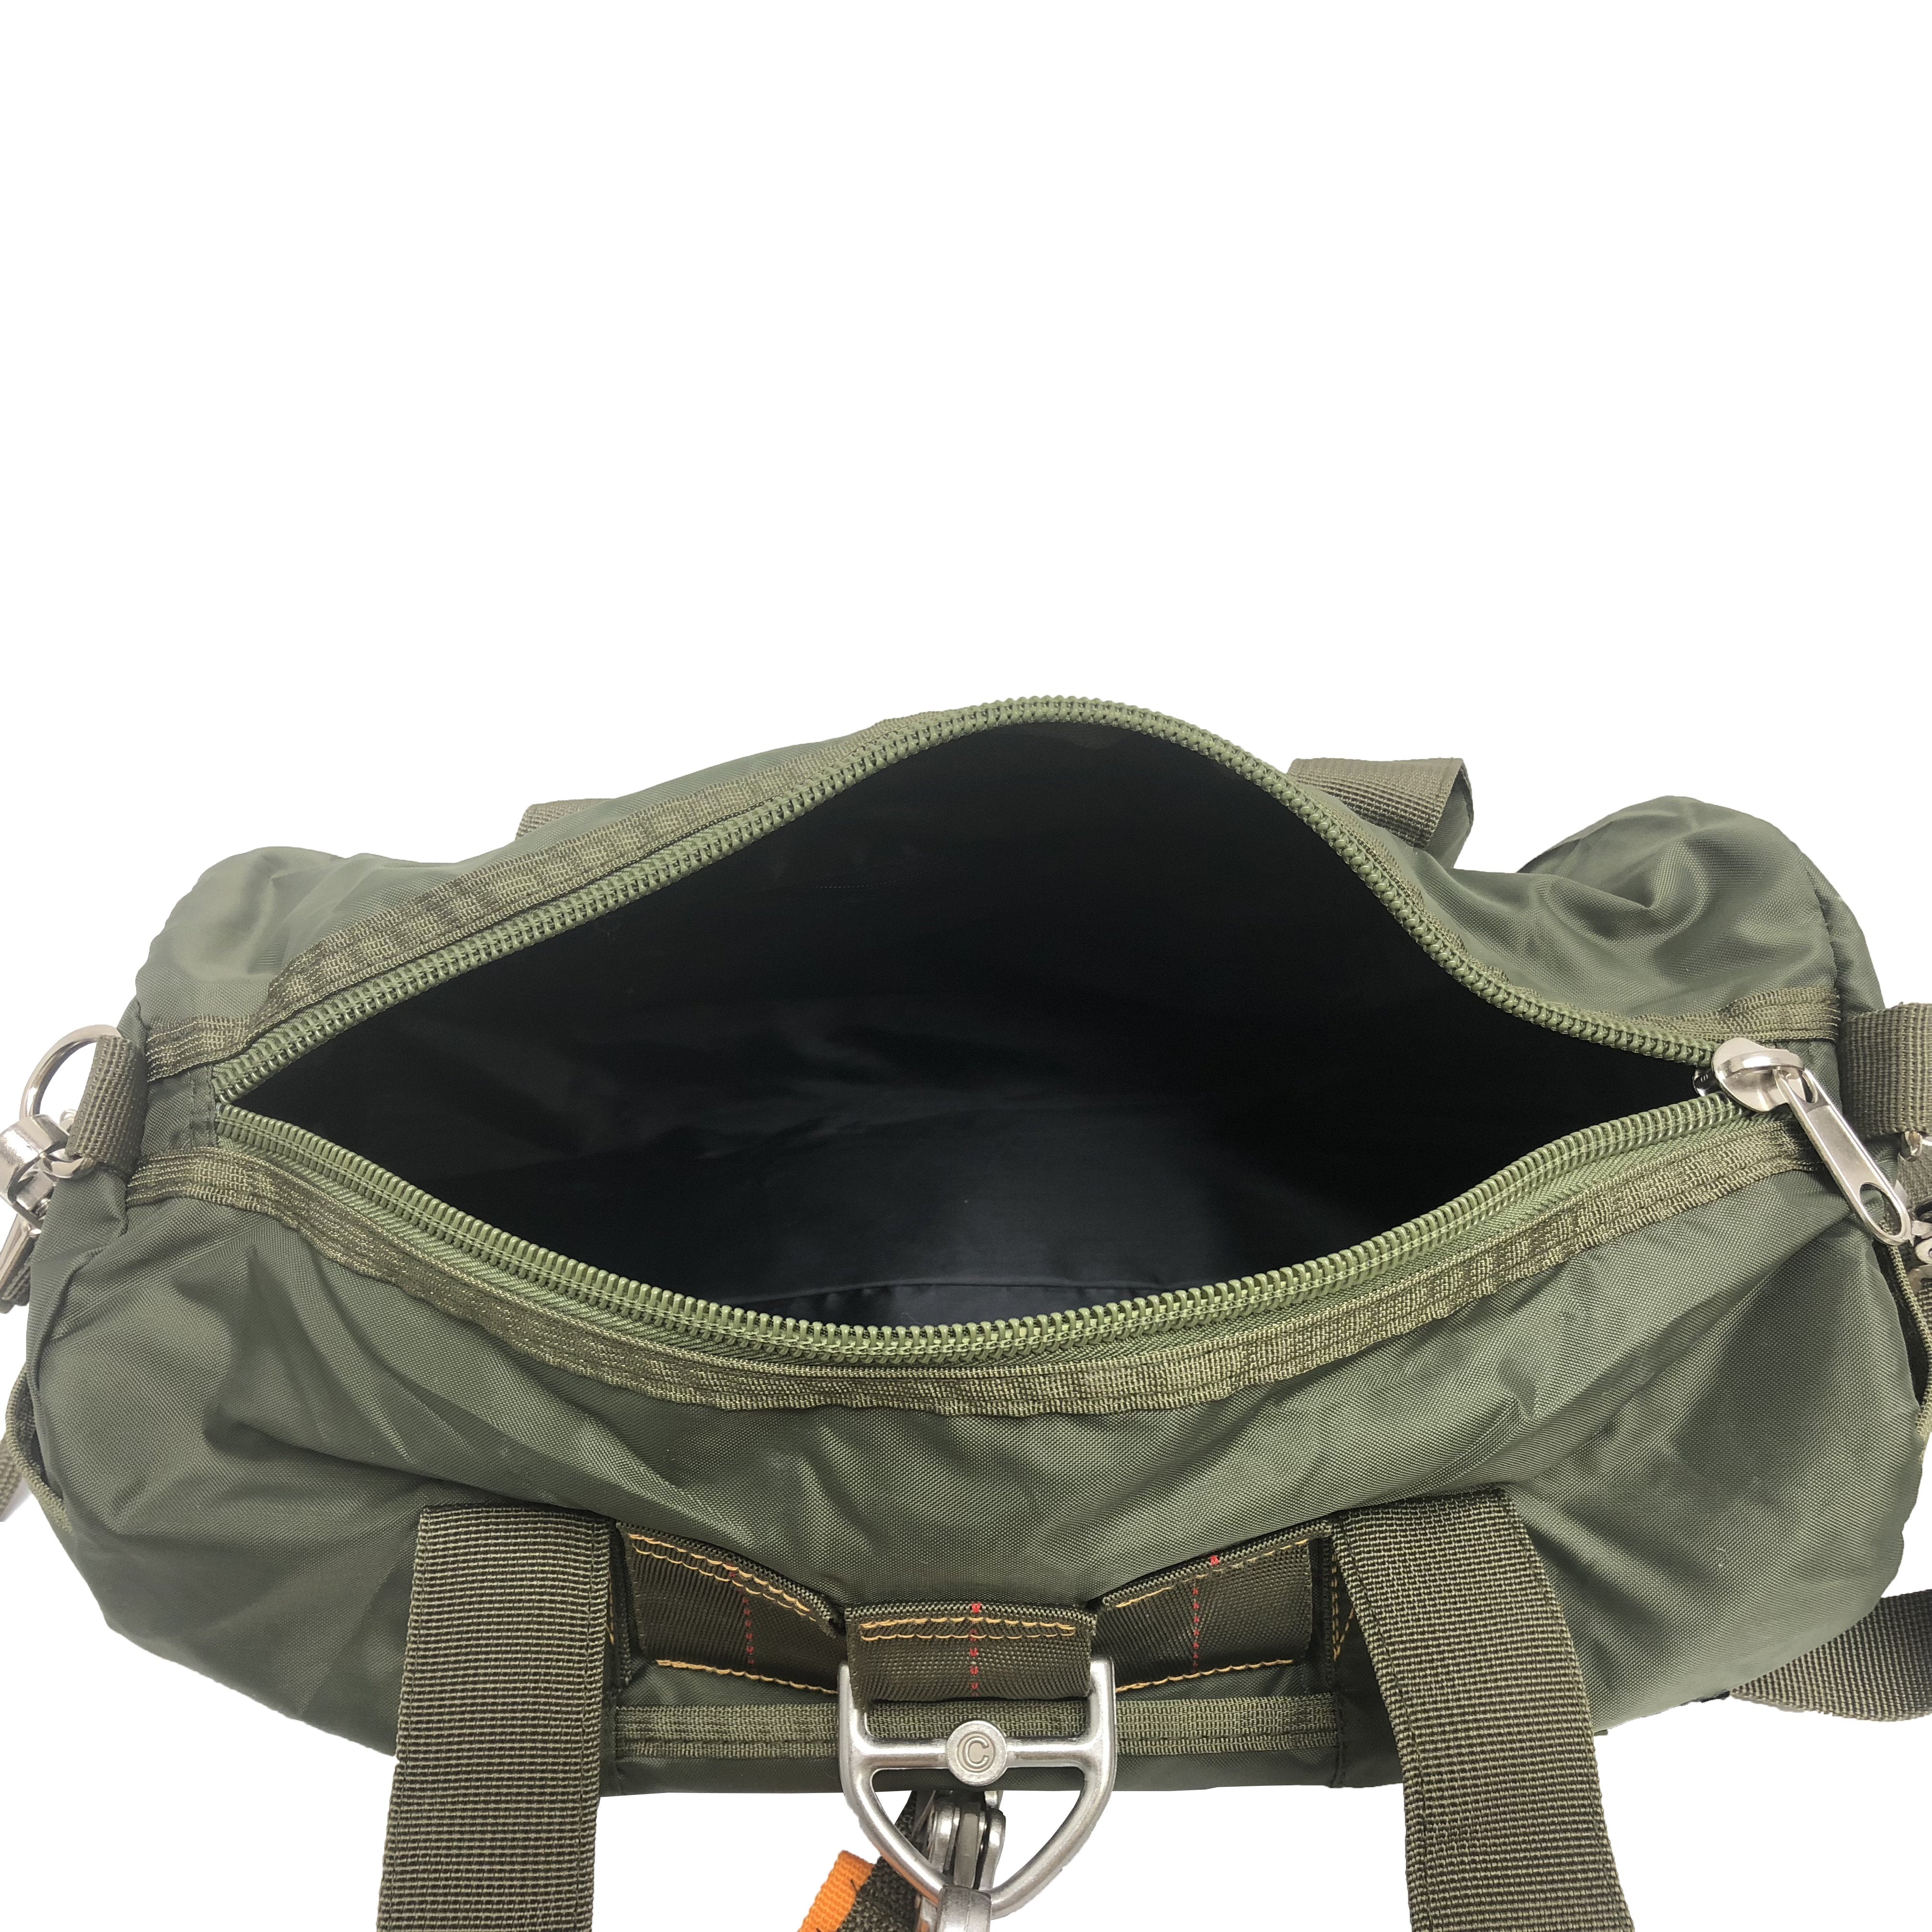 SPECIAL OPS AIRBORNE DUFFLE